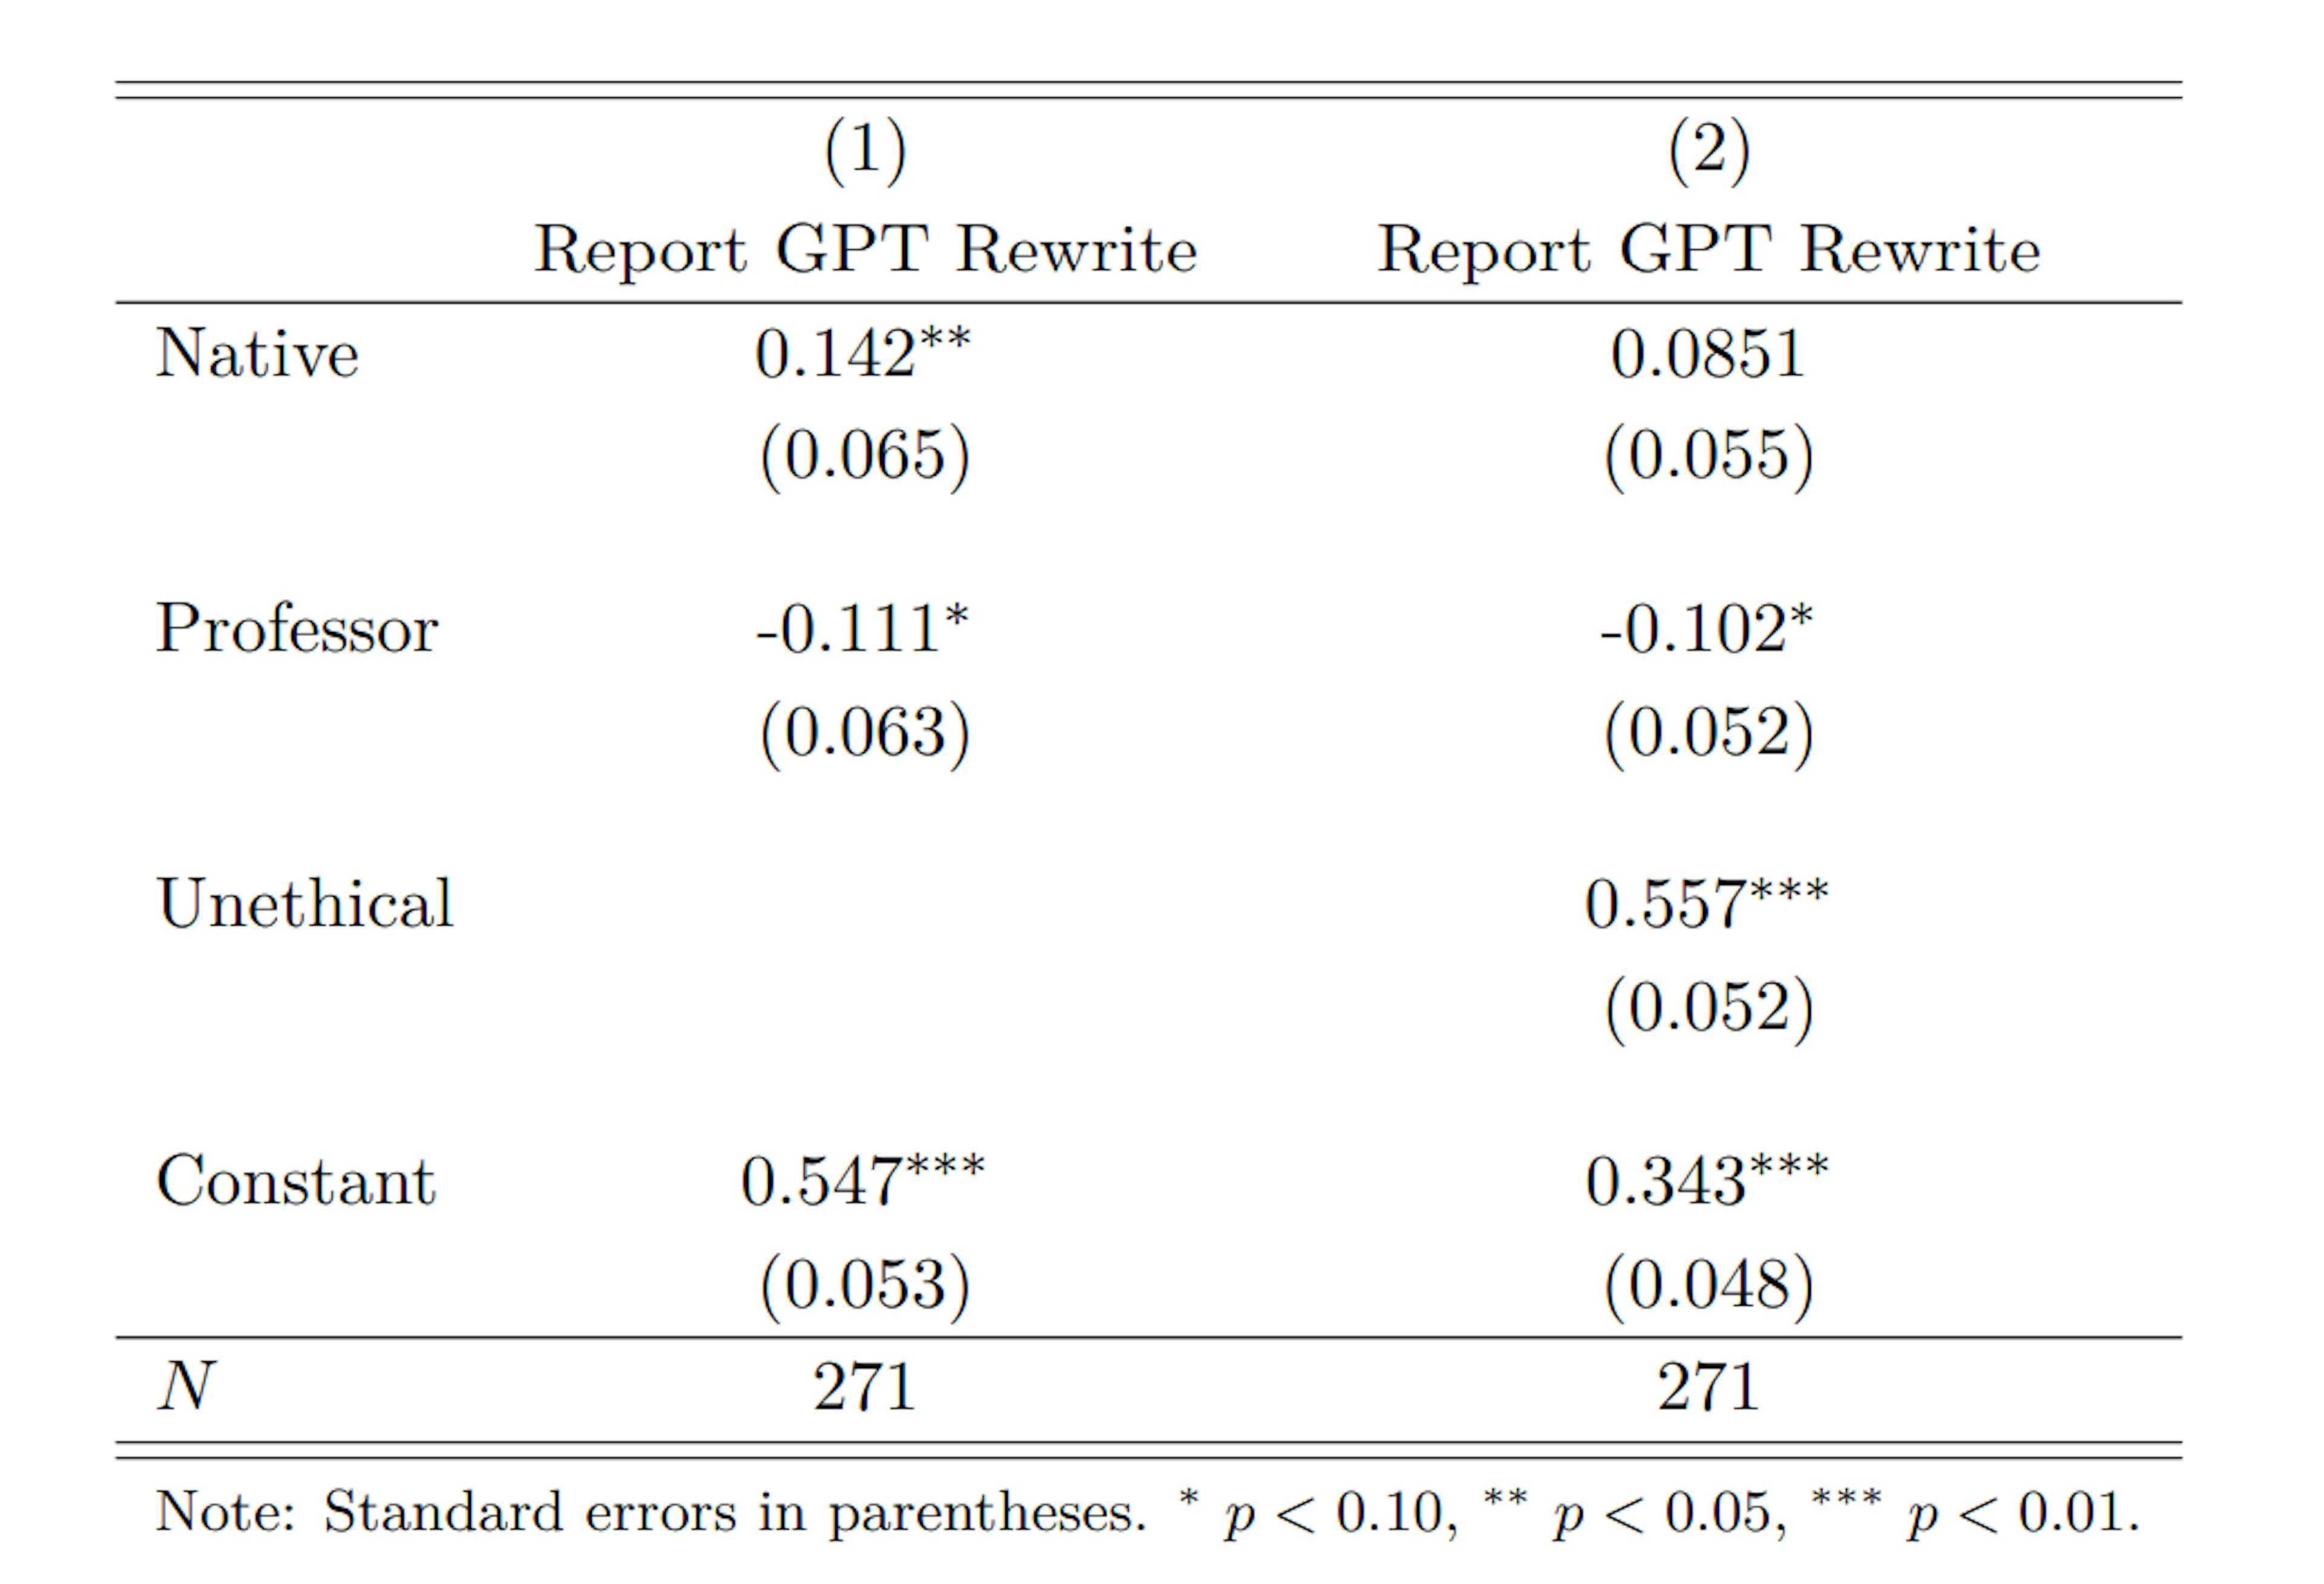 Table 2: Regressions of whether using GPT to rewrite should be reported (dummy variable) onto being a native English speaker or not (dummy variable), being a professor or not (dummy variable), and in the second specification, whether using ChatGPT to rewrite text is unethical or not (dummy variable).